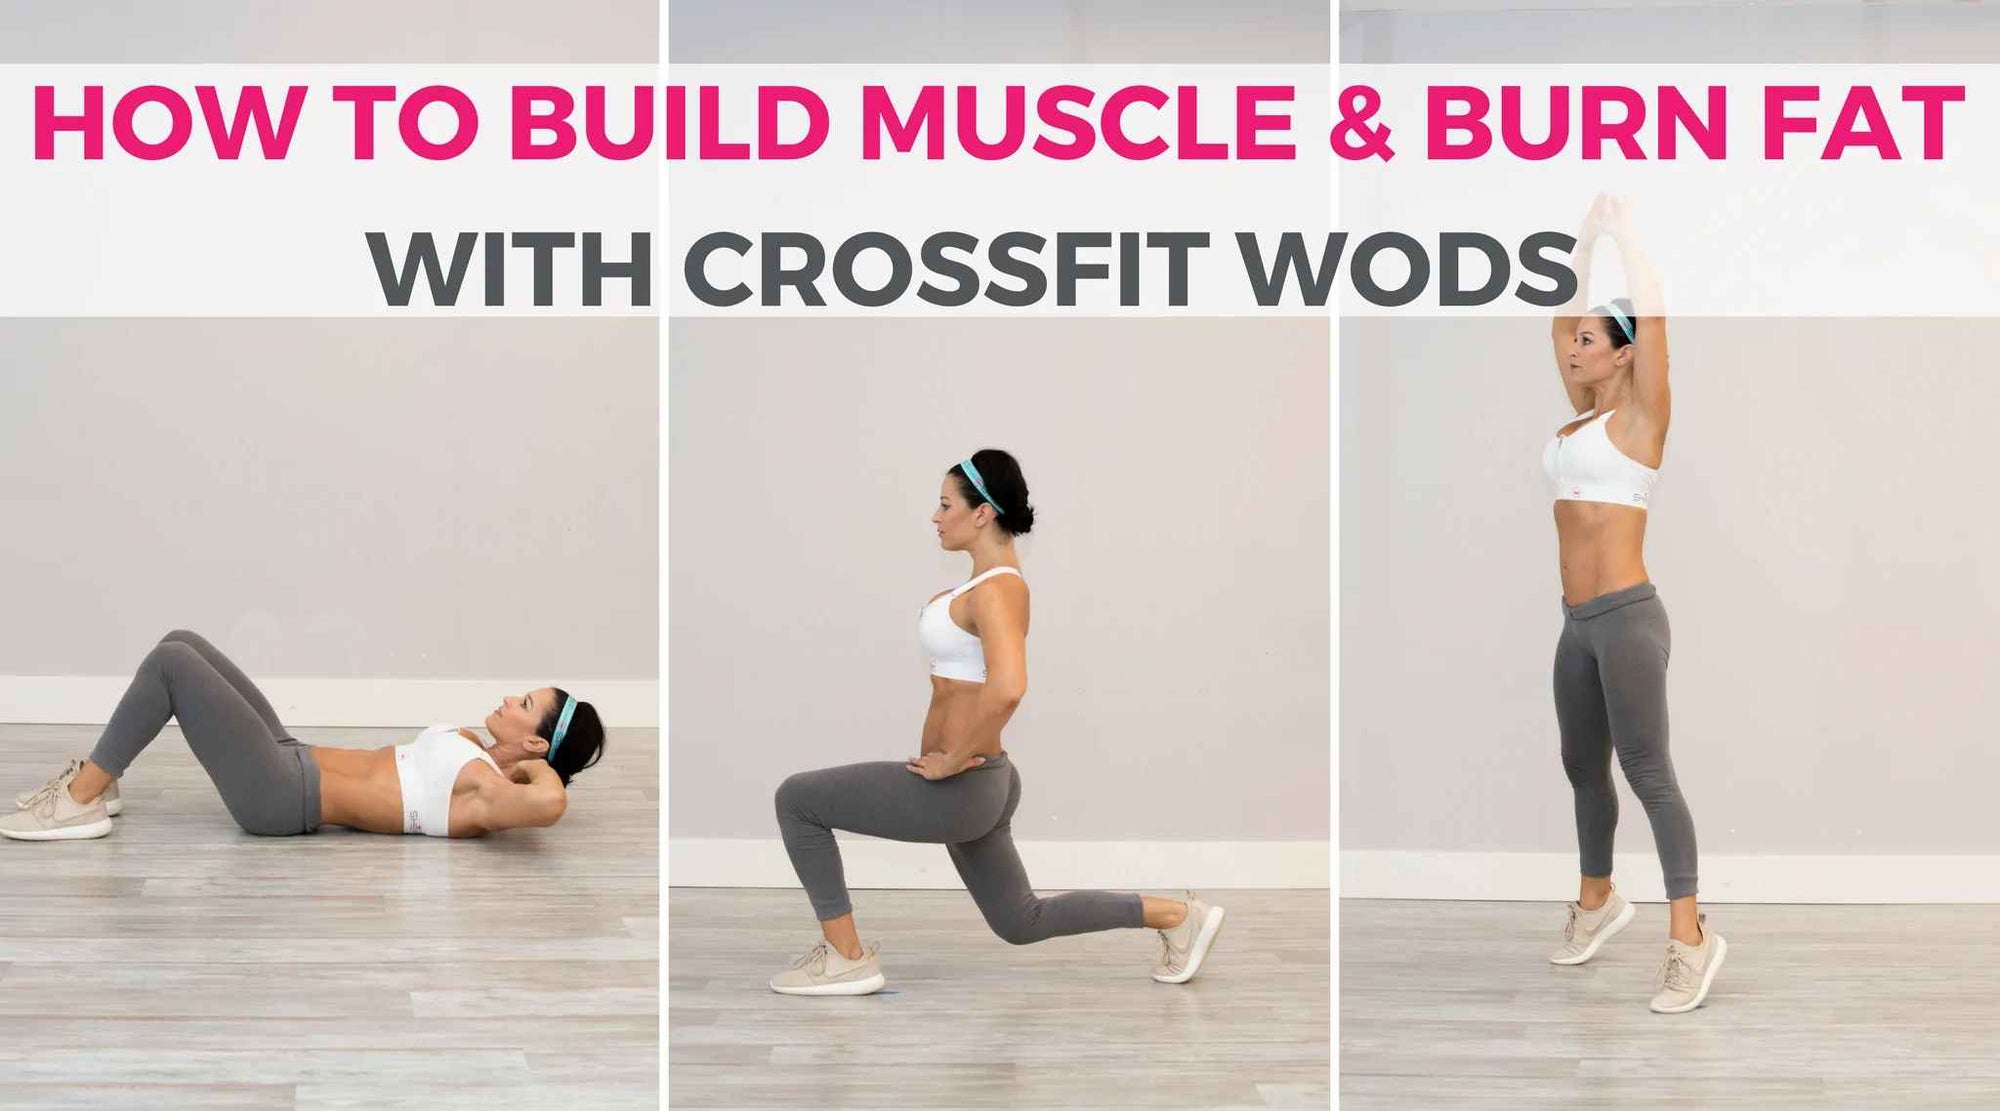 An Awesome Fat Burning CrossFit Workout for Weight Loss - SHEFIT